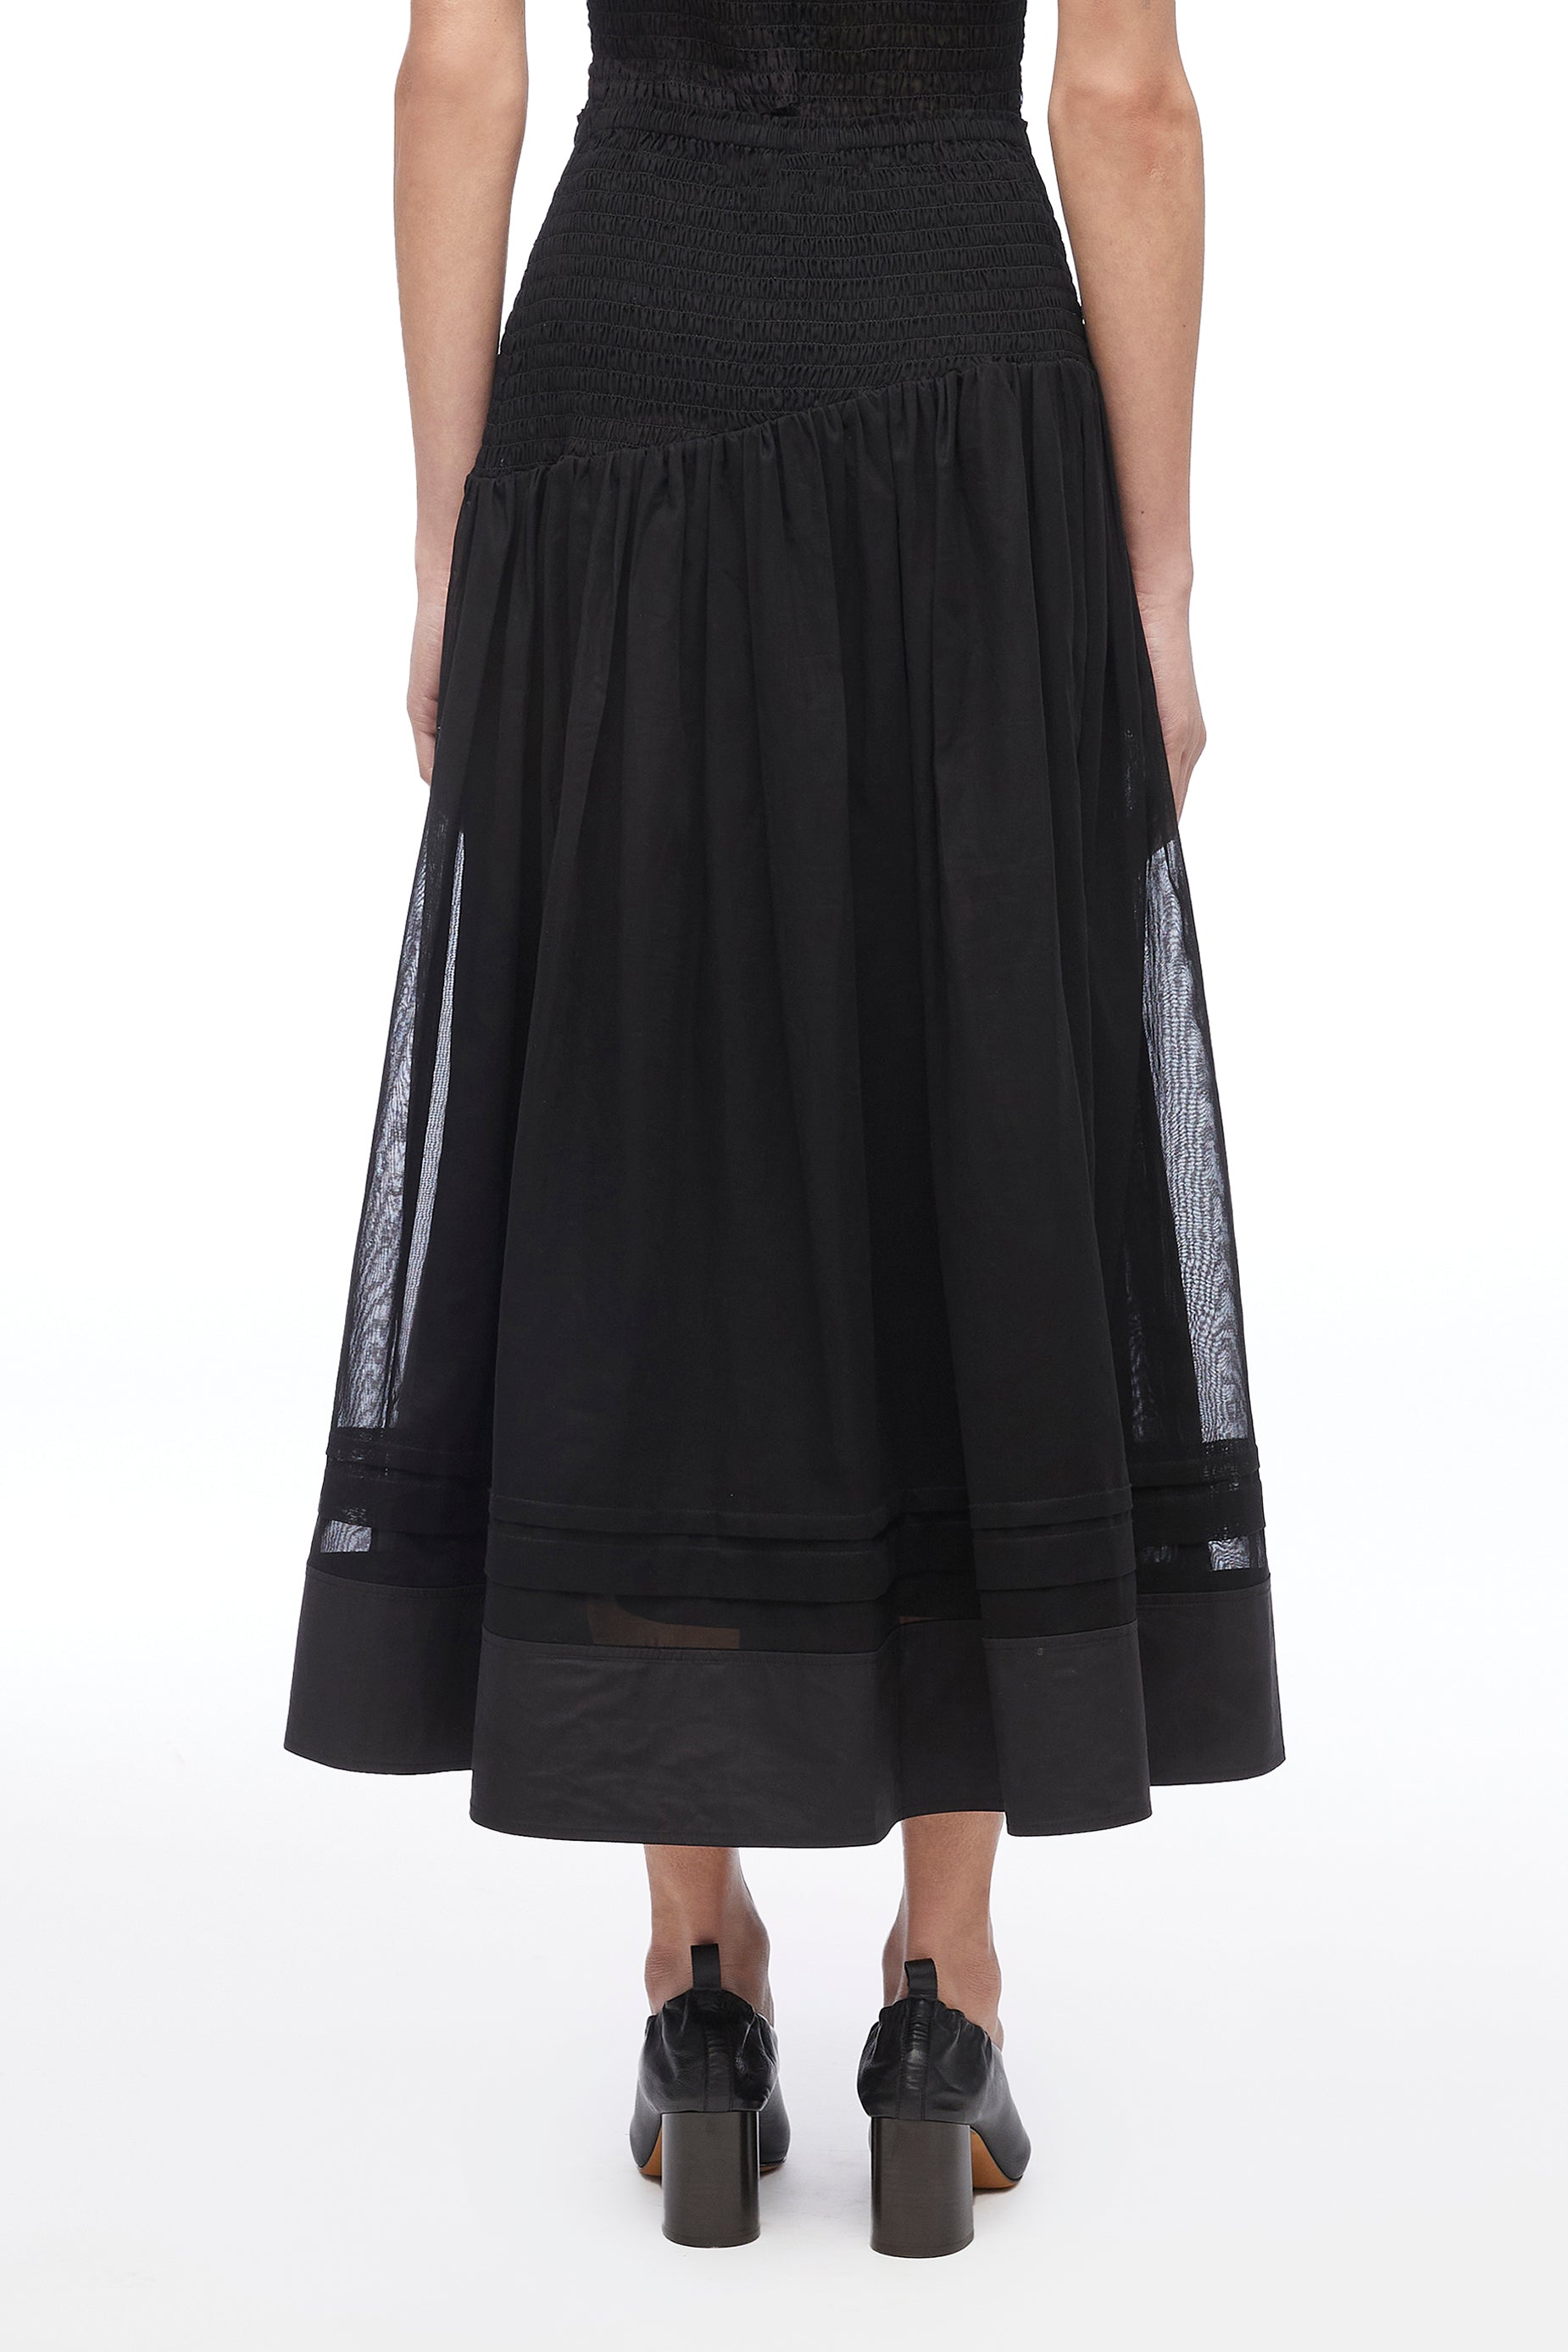 Cotton Voile Skirt With Smocking